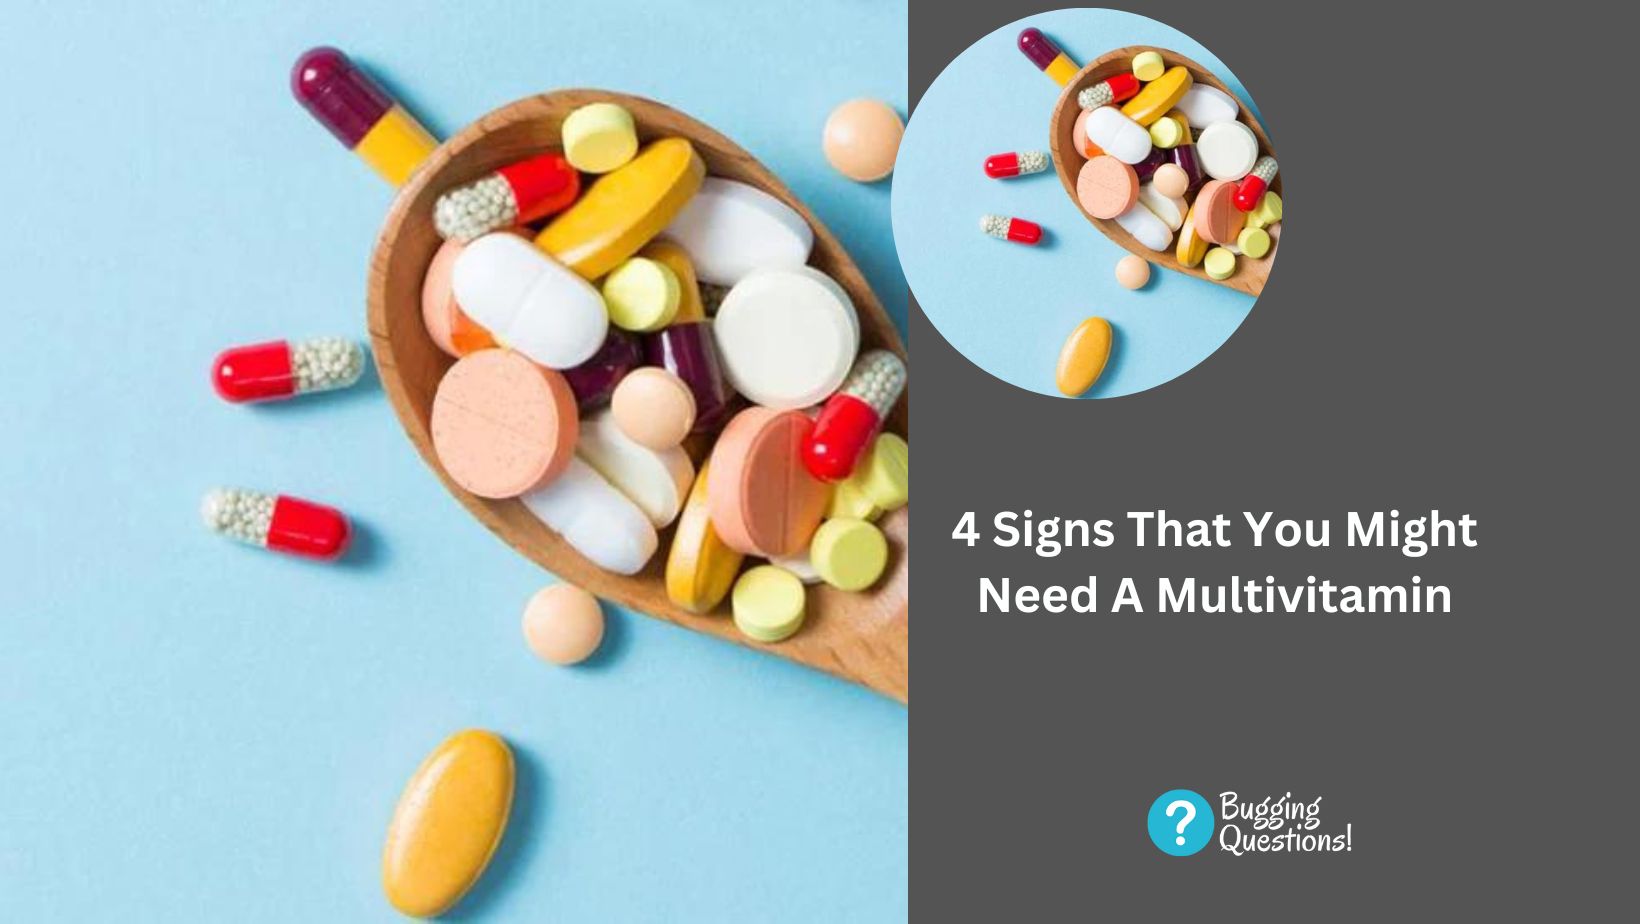 4 Signs That You Might Need A Multivitamin